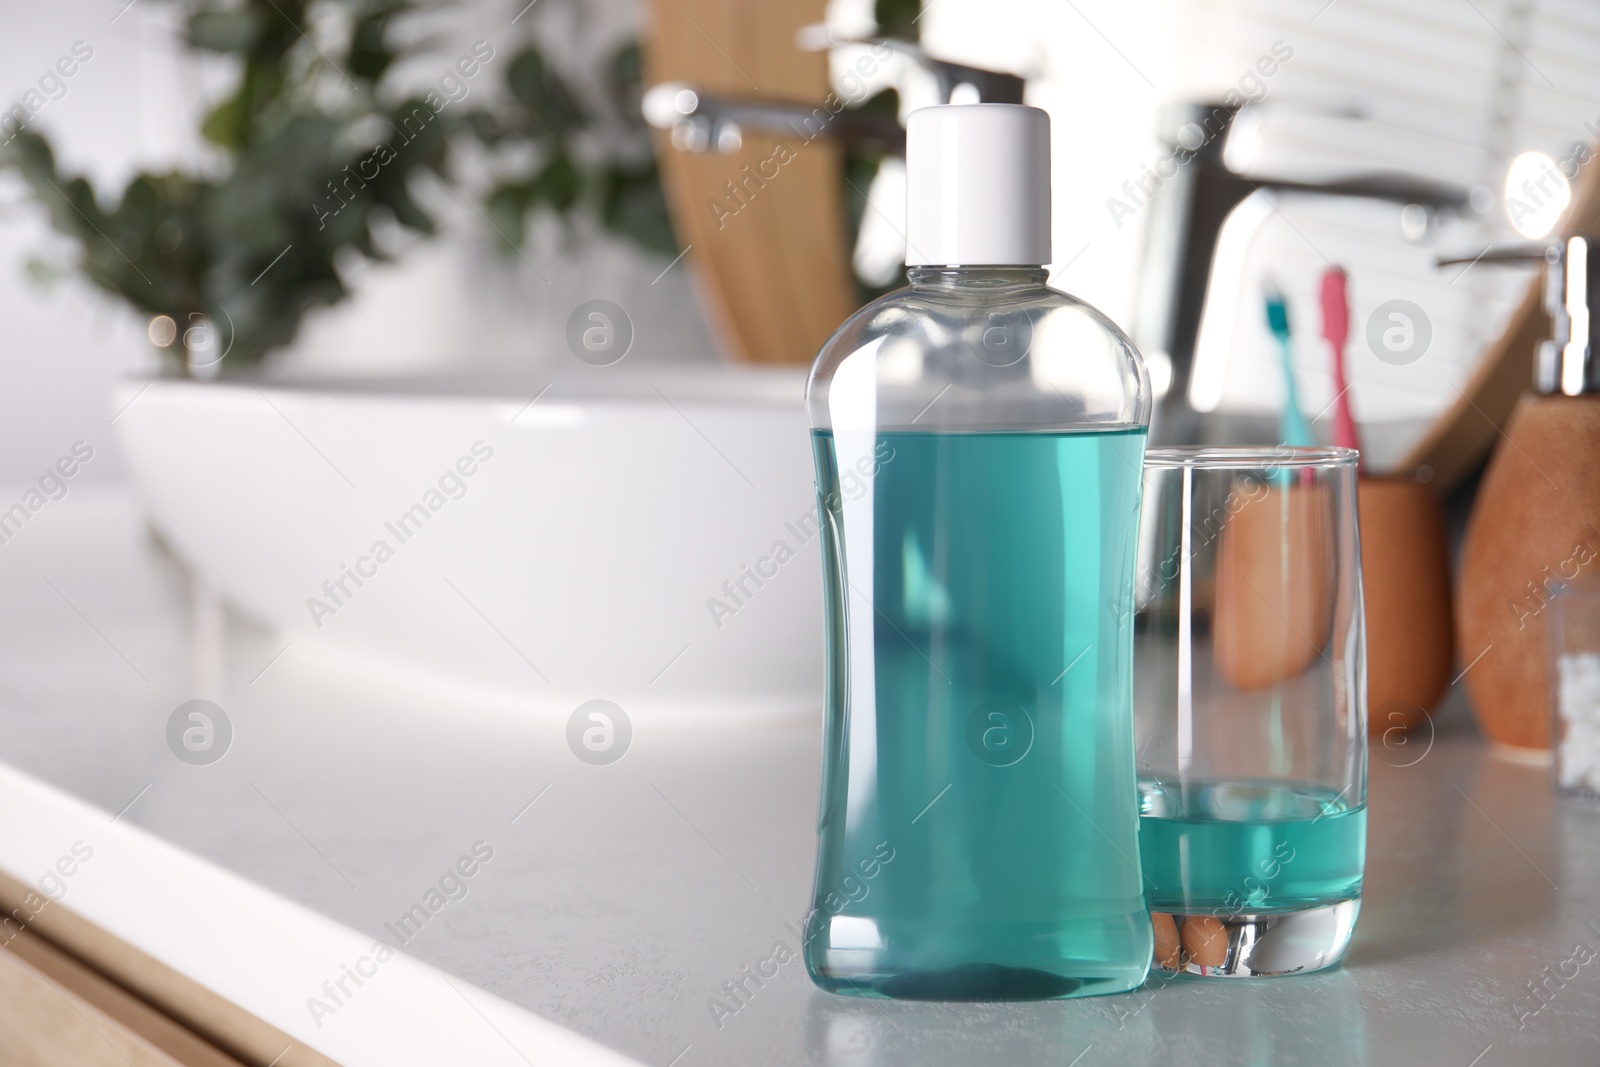 Photo of Bottle and glass of mouthwash on light countertop in bathroom